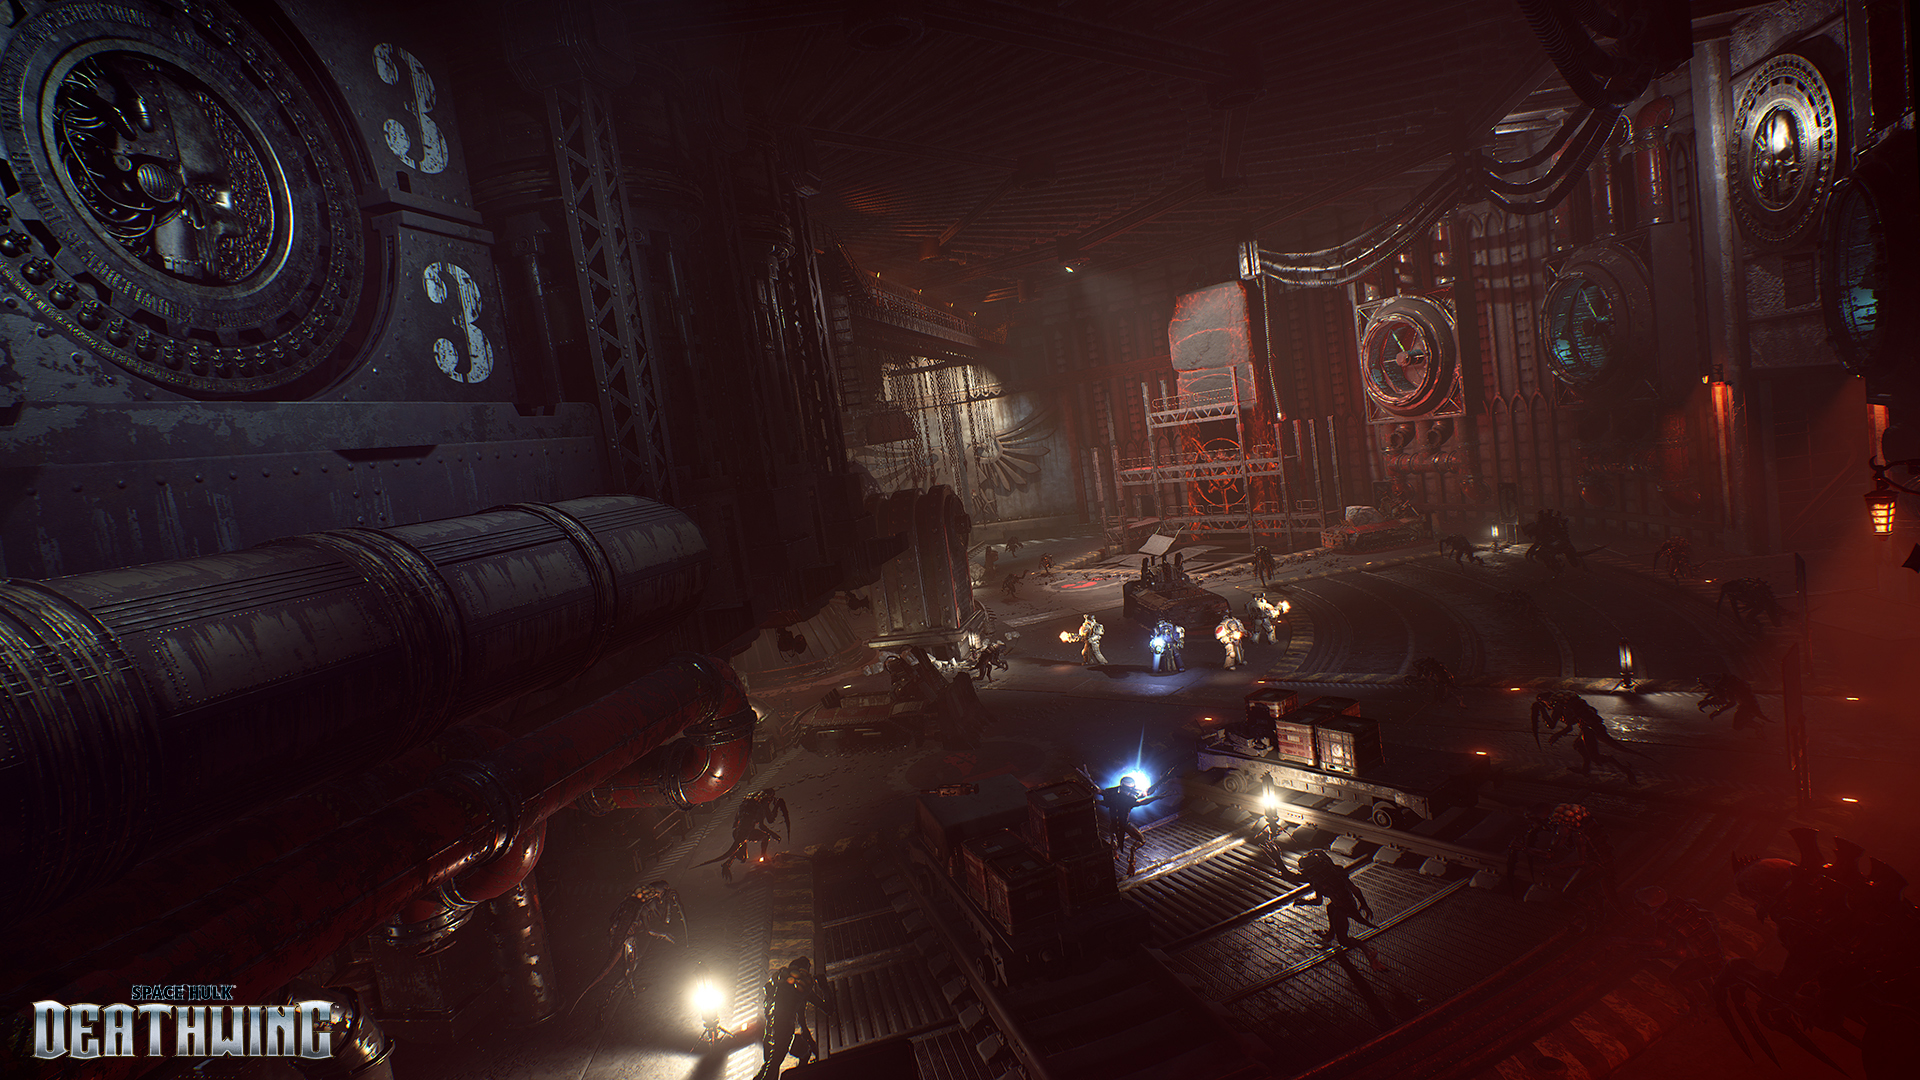 Media asset in full size related to 3dfxzone.it news item entitled as follows: 17 minuti di gameplay in single-player dello shooterSpace Hulk: Deathwing | Image Name: news25285_Space-Hulk-Deathwing-Screenshot_5.jpg